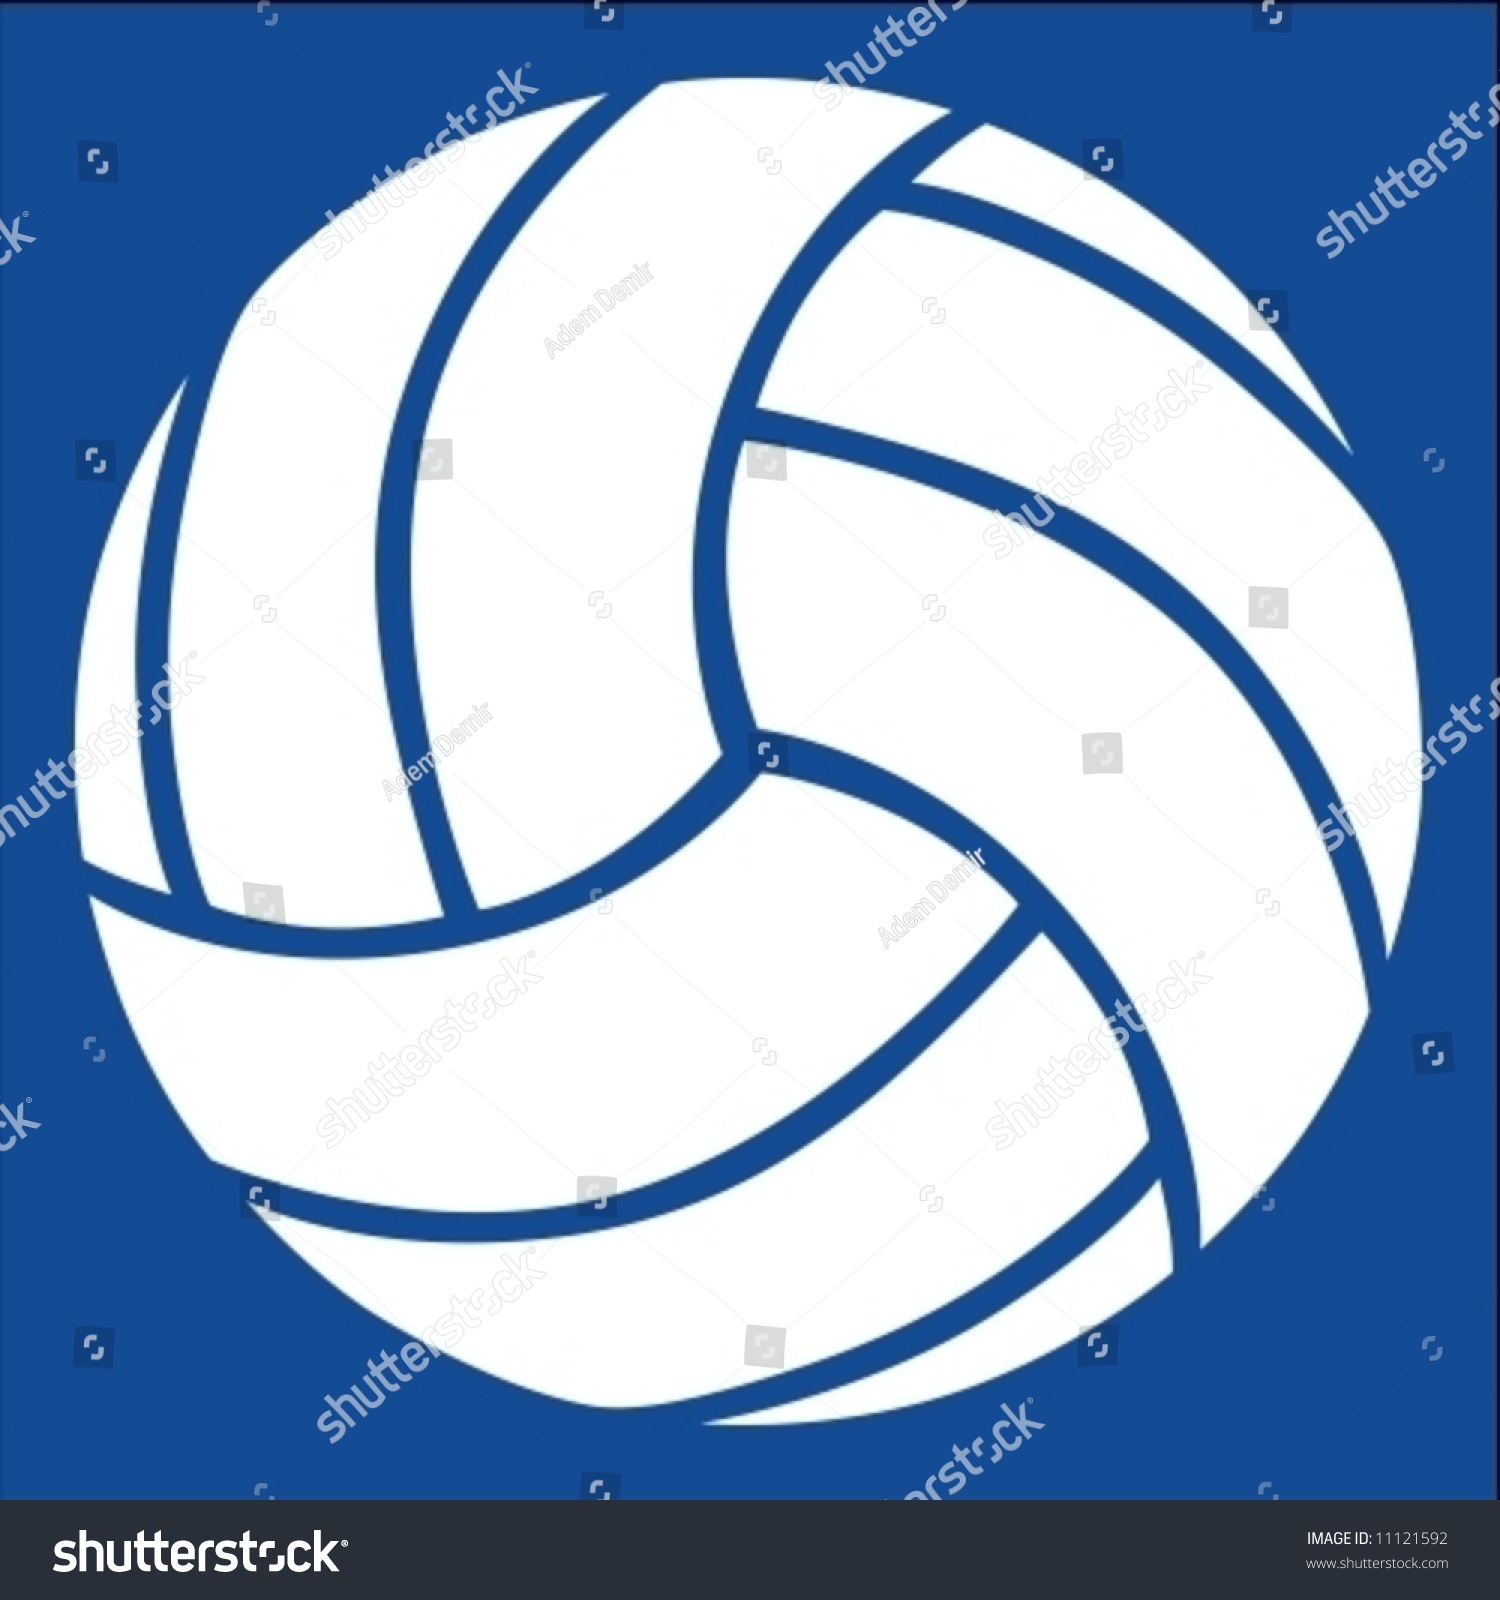 Volleyball - Volleyball Vector Icon. - 11121592 : Shutterstock